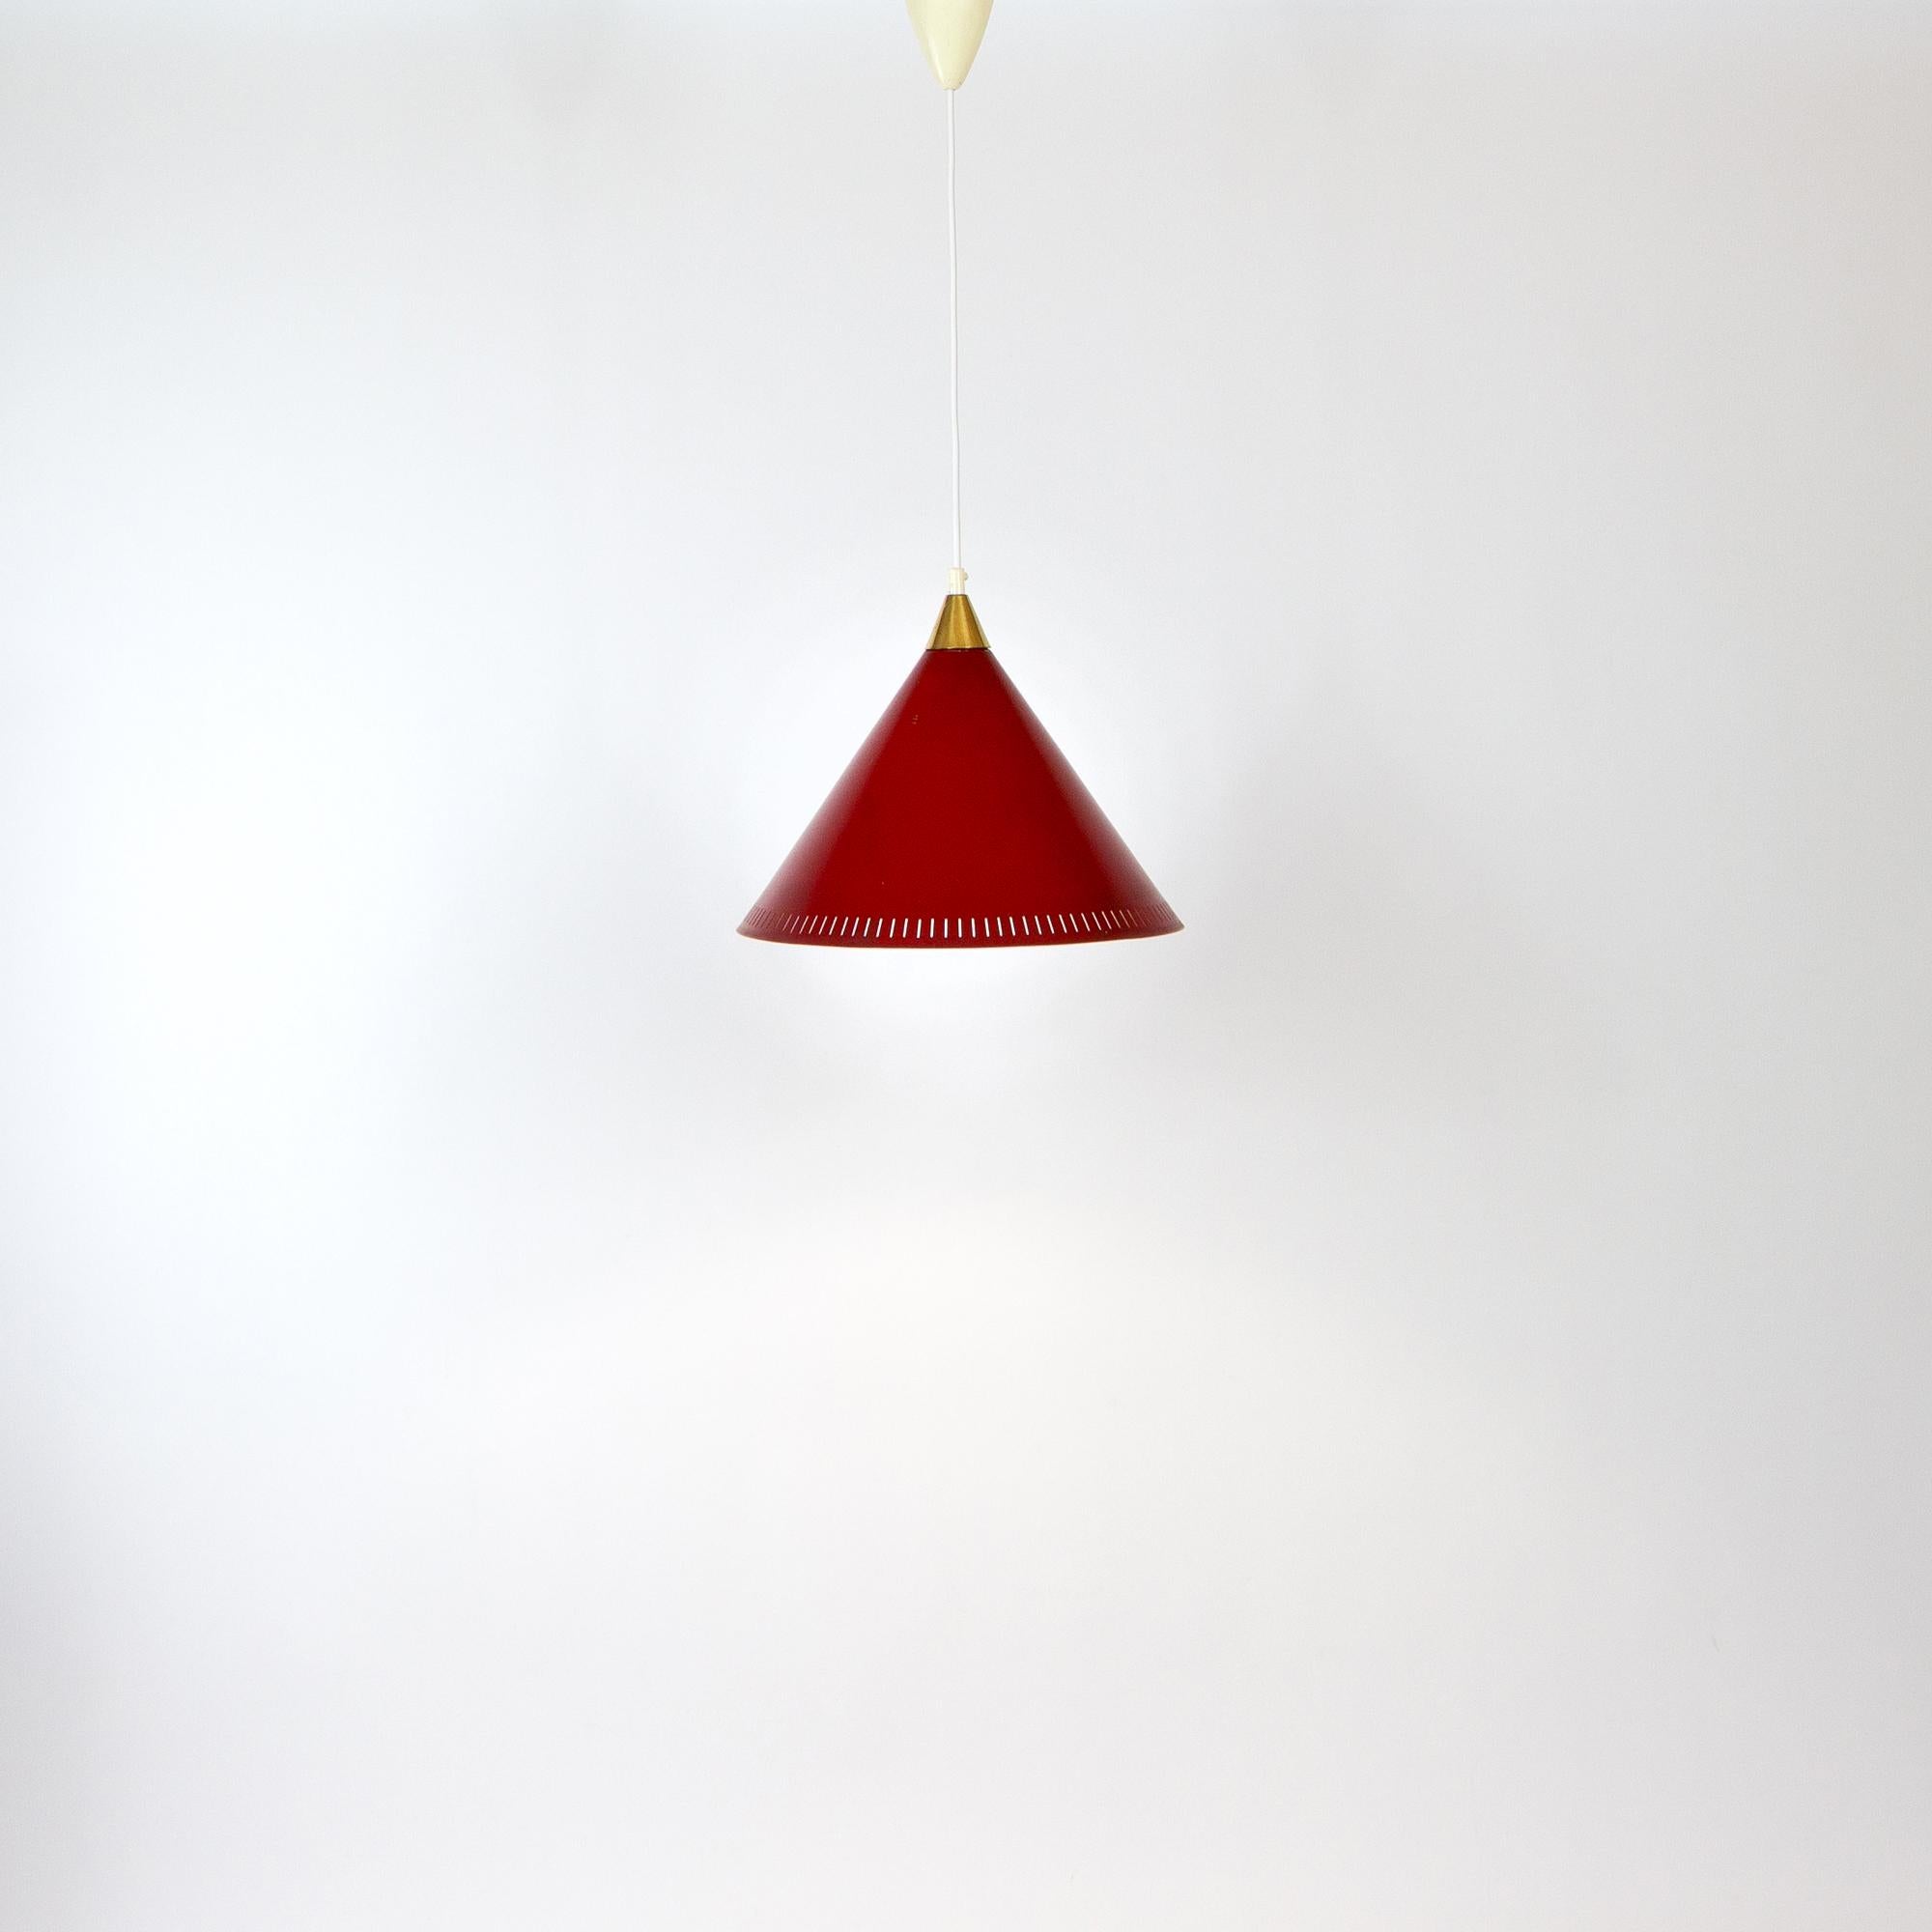 Red Kegle pendant by Bent Karlby for Lyfa, Denmark, 1960s. Original height adjuster with new white cloth braided flex. Winner of the International Forum Product Design Awards, 1969.
 
  